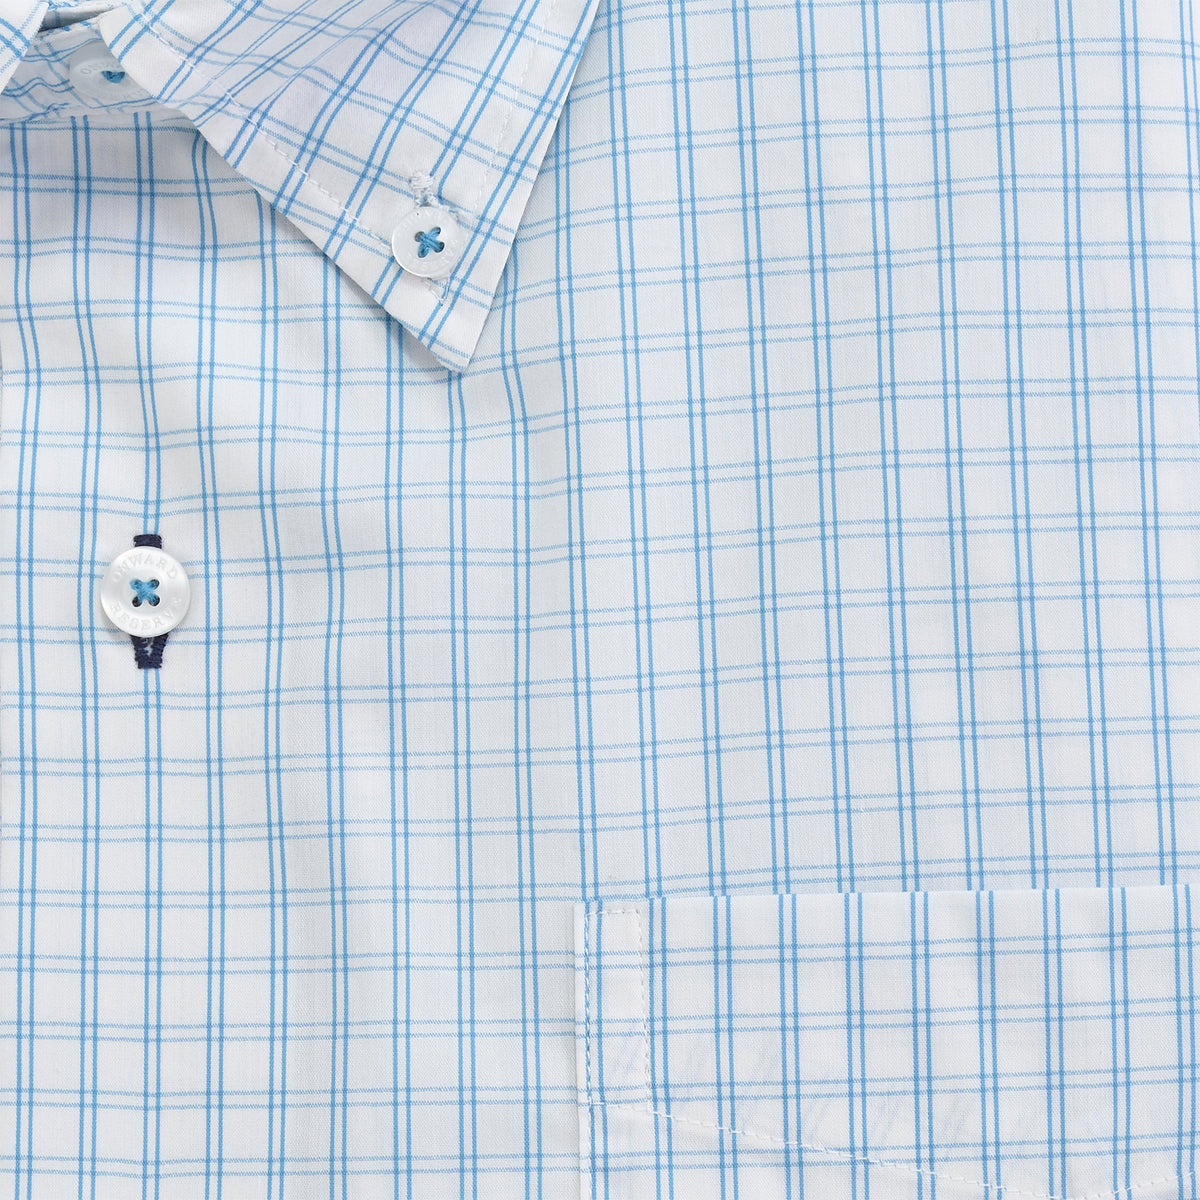 Onward Reserve Bell Classic Fit Button Down - Lichen Blue